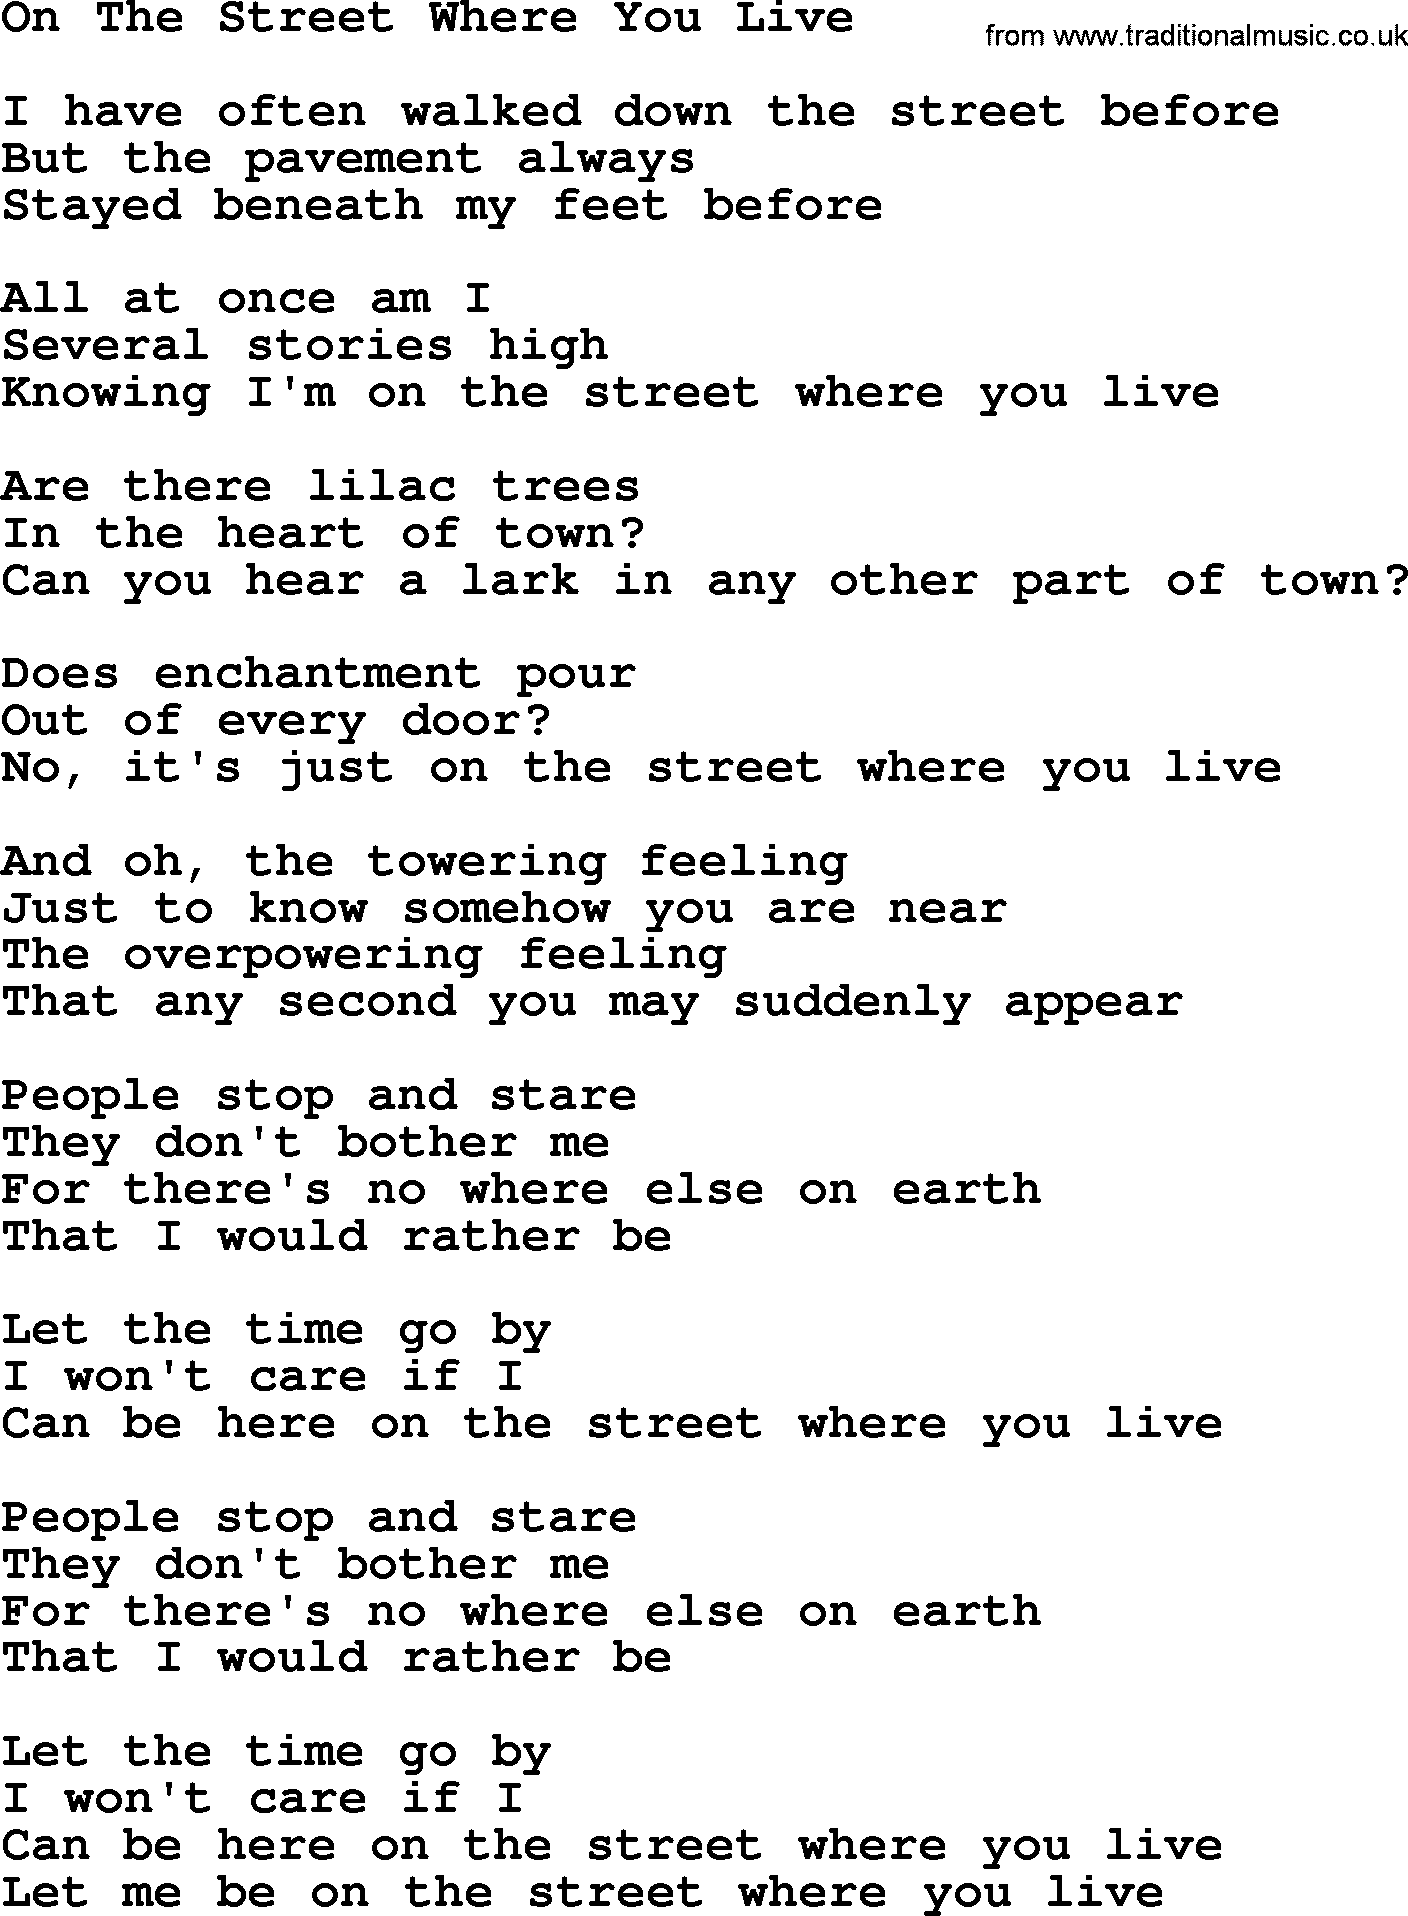 Willie Nelson song: On The Street Where You Live lyrics